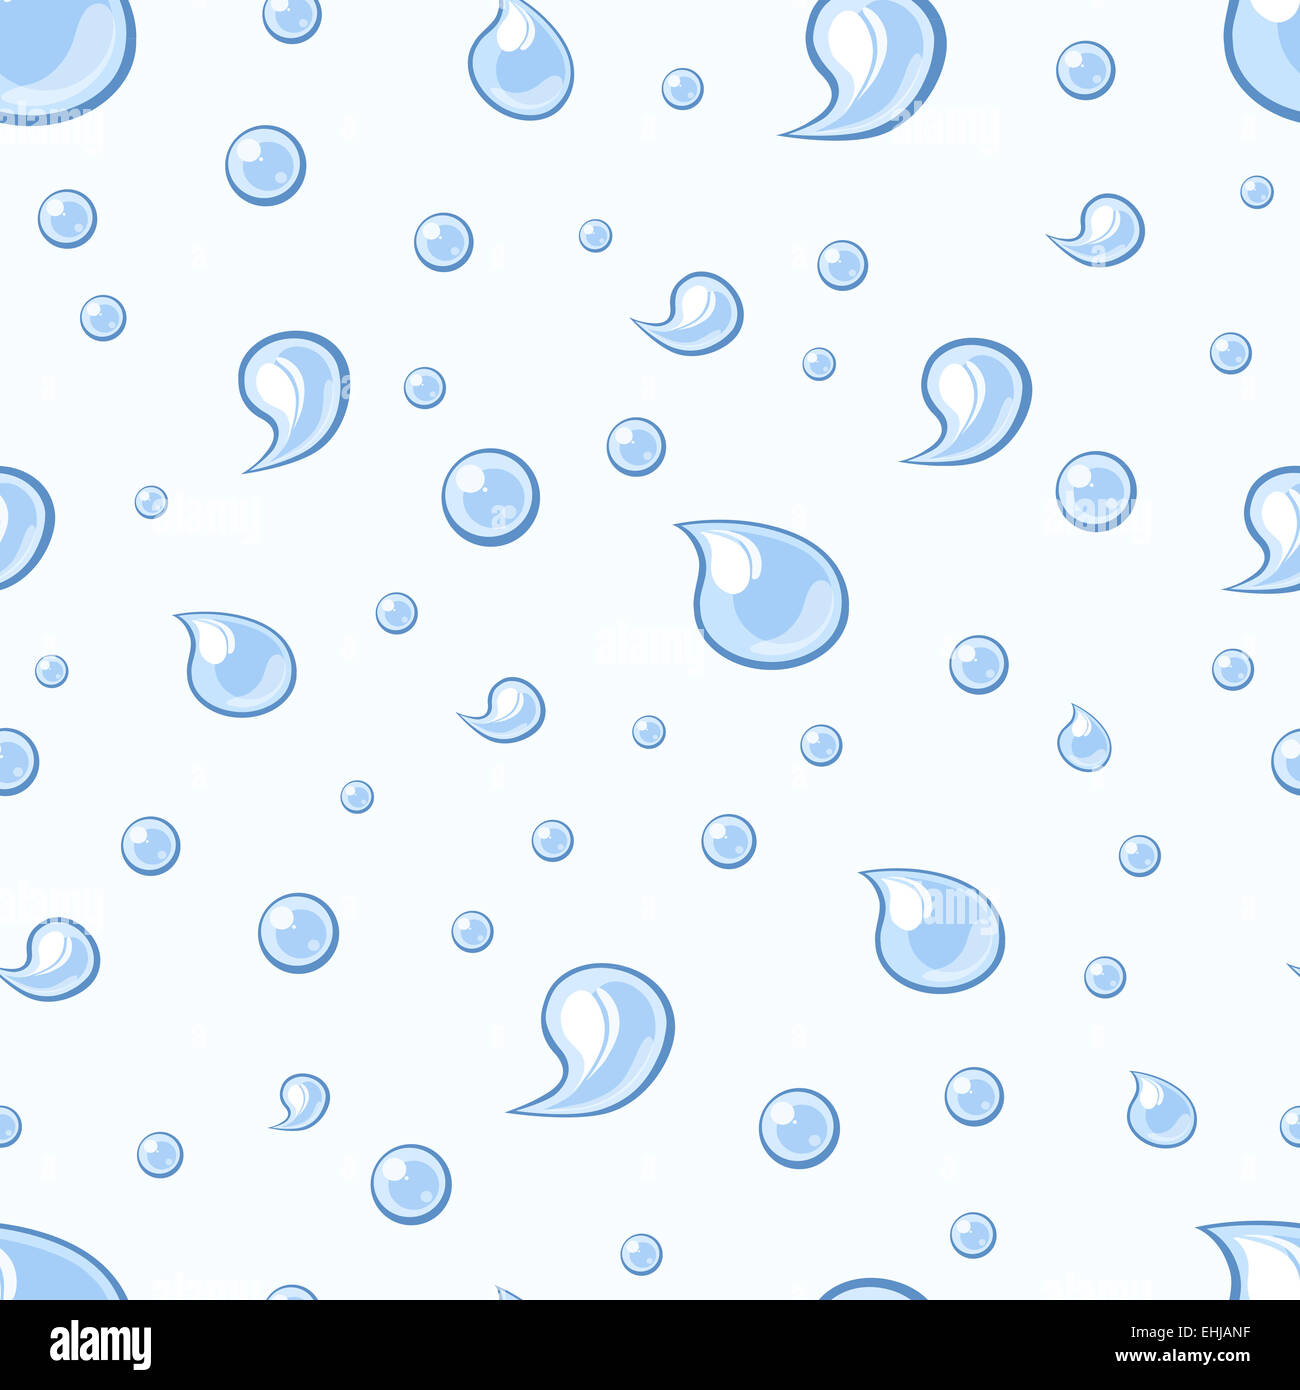 Water drops vector seamless texture Stock Photo